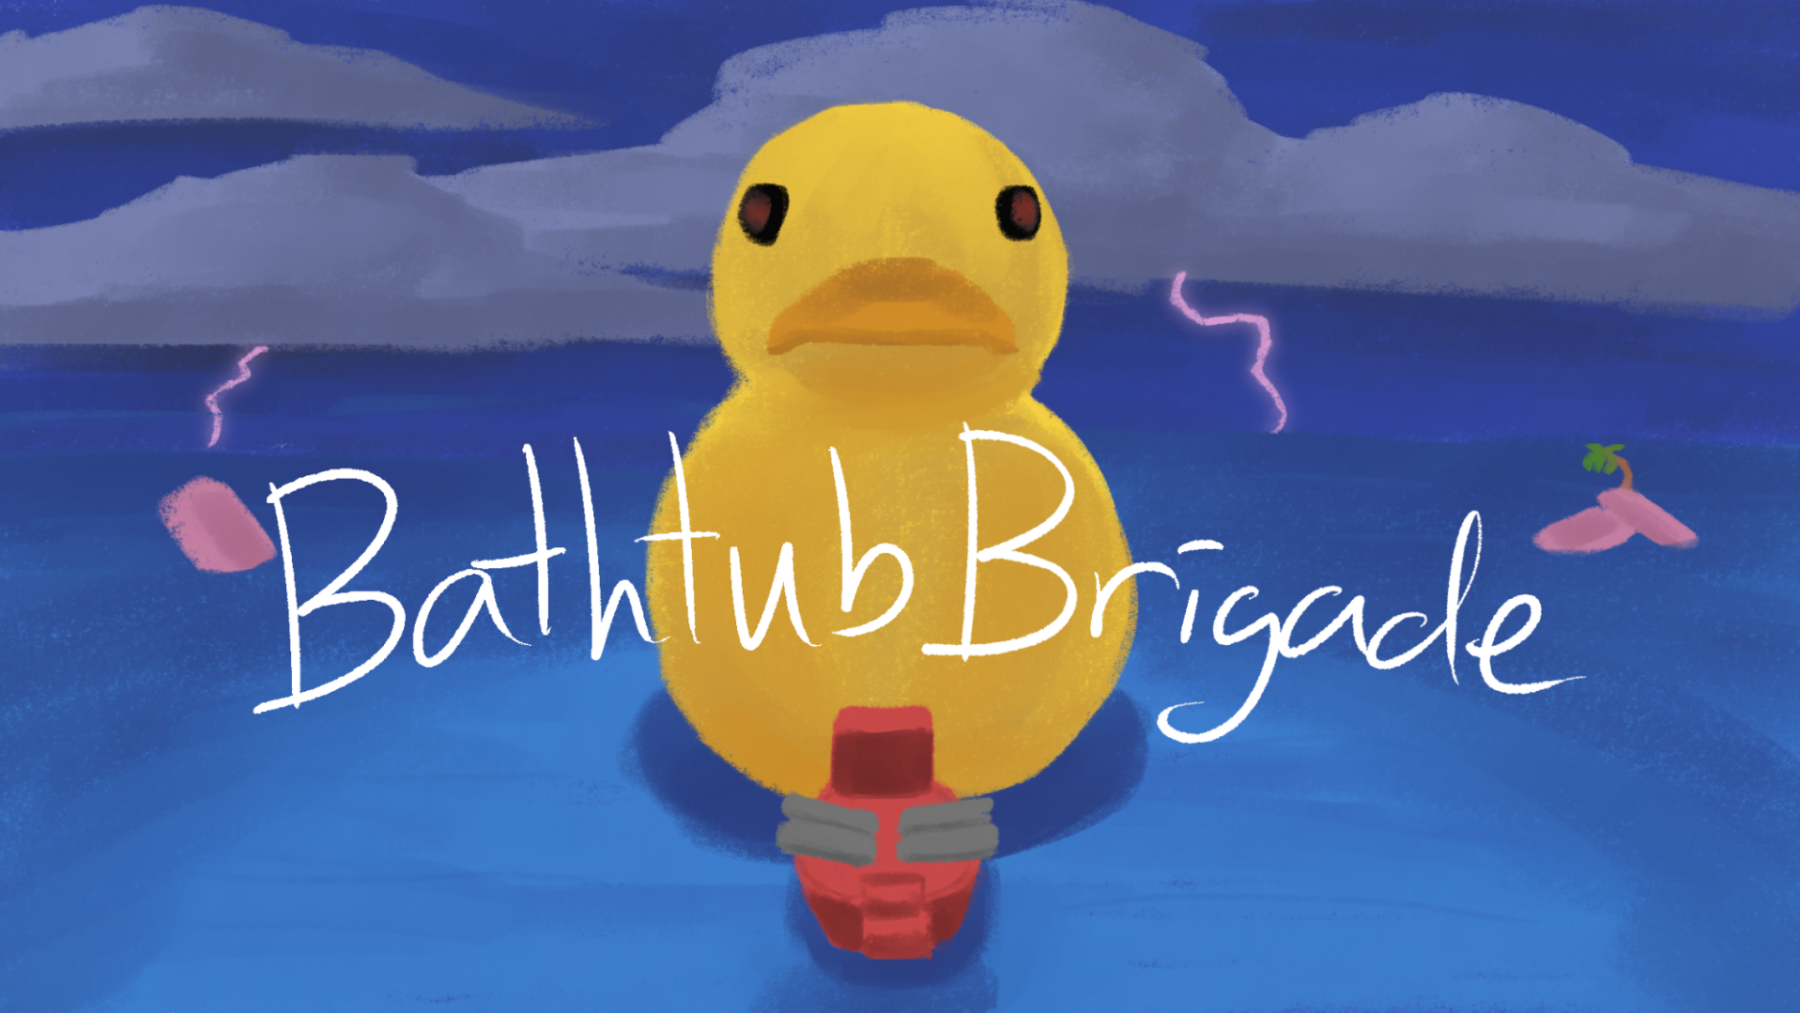 Rubber Duck being pulled by a Tug Boat with the words Bathtub Bridage over the top